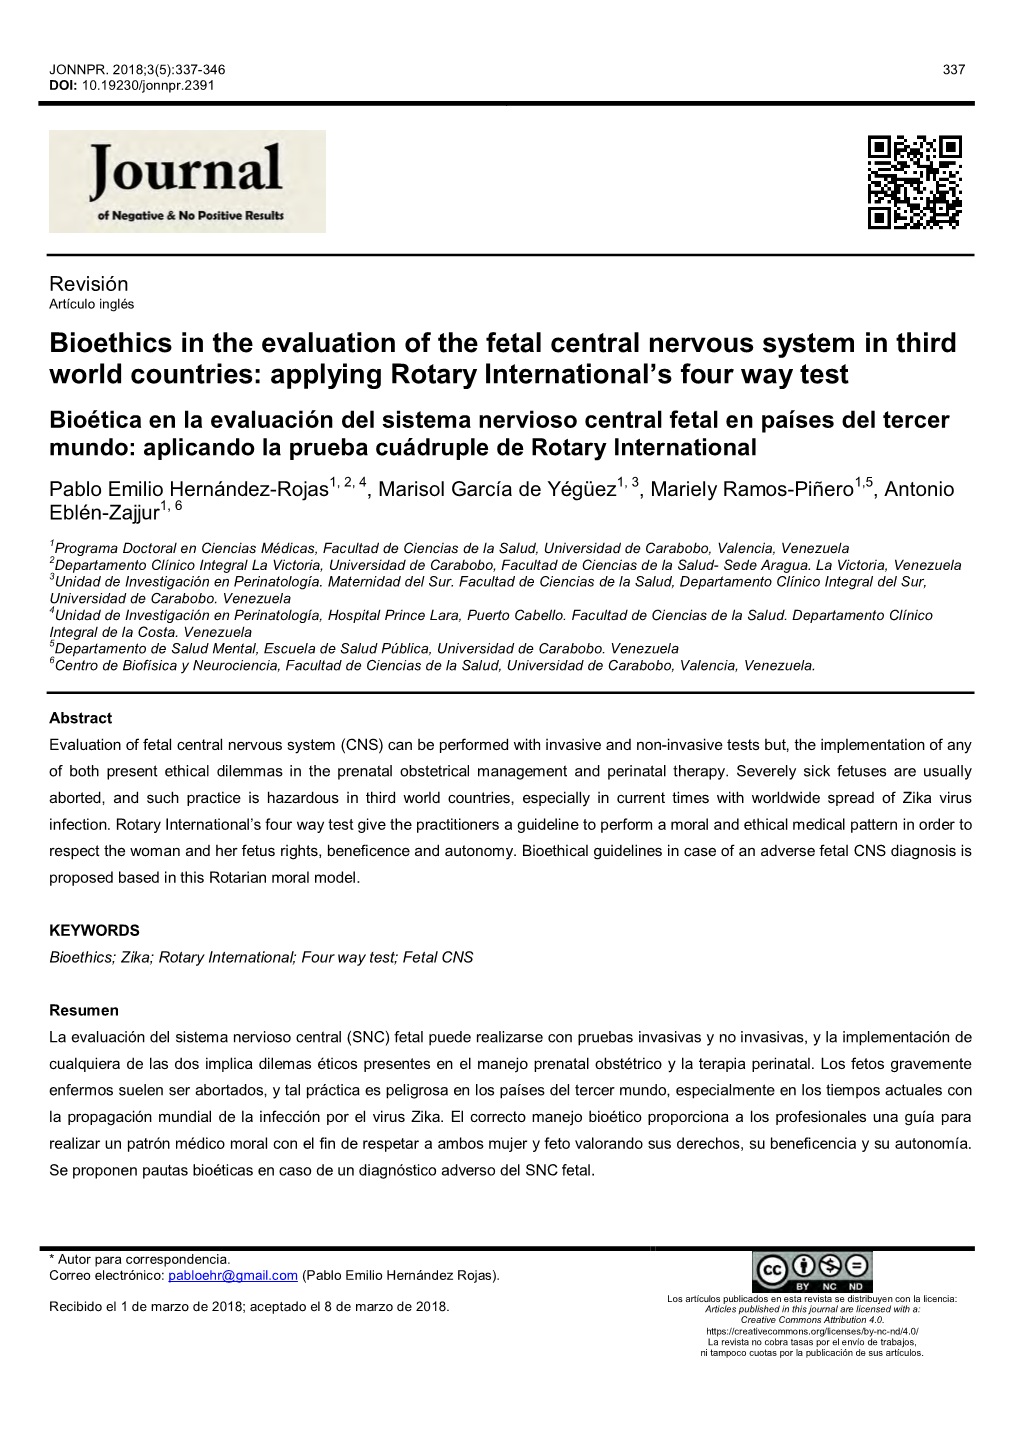 Bioethics in the Evaluation of the Fetal Central Nervous System in Third